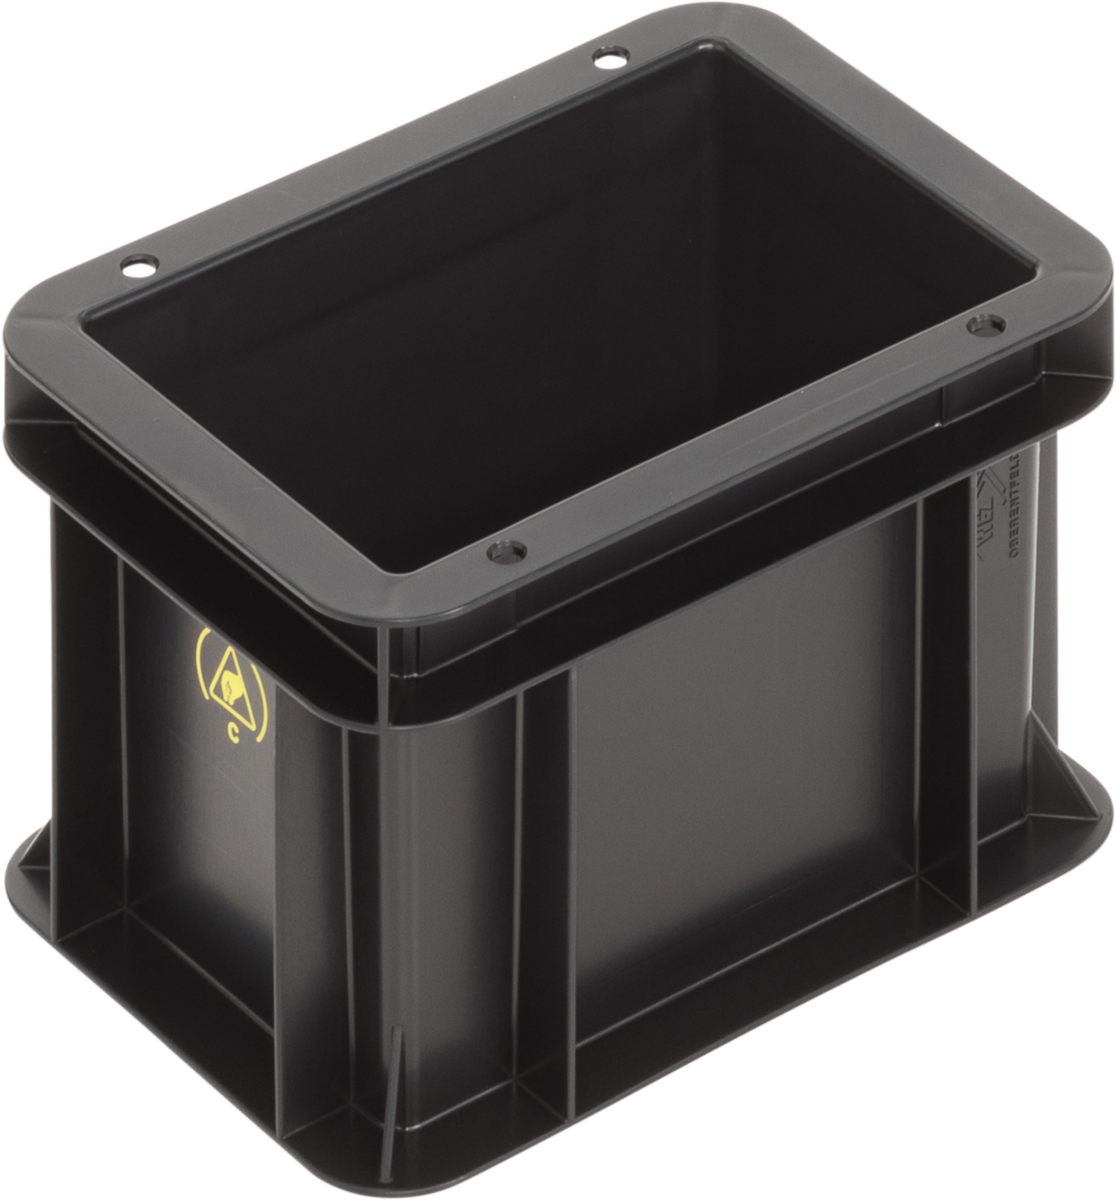 Anti-Static-ESD-Antistatic-Safe-SGL-Norm-Stacking-Bin-Containers-Flat-Base-Ref.-2113.007.992_1004183_200x150x145_01